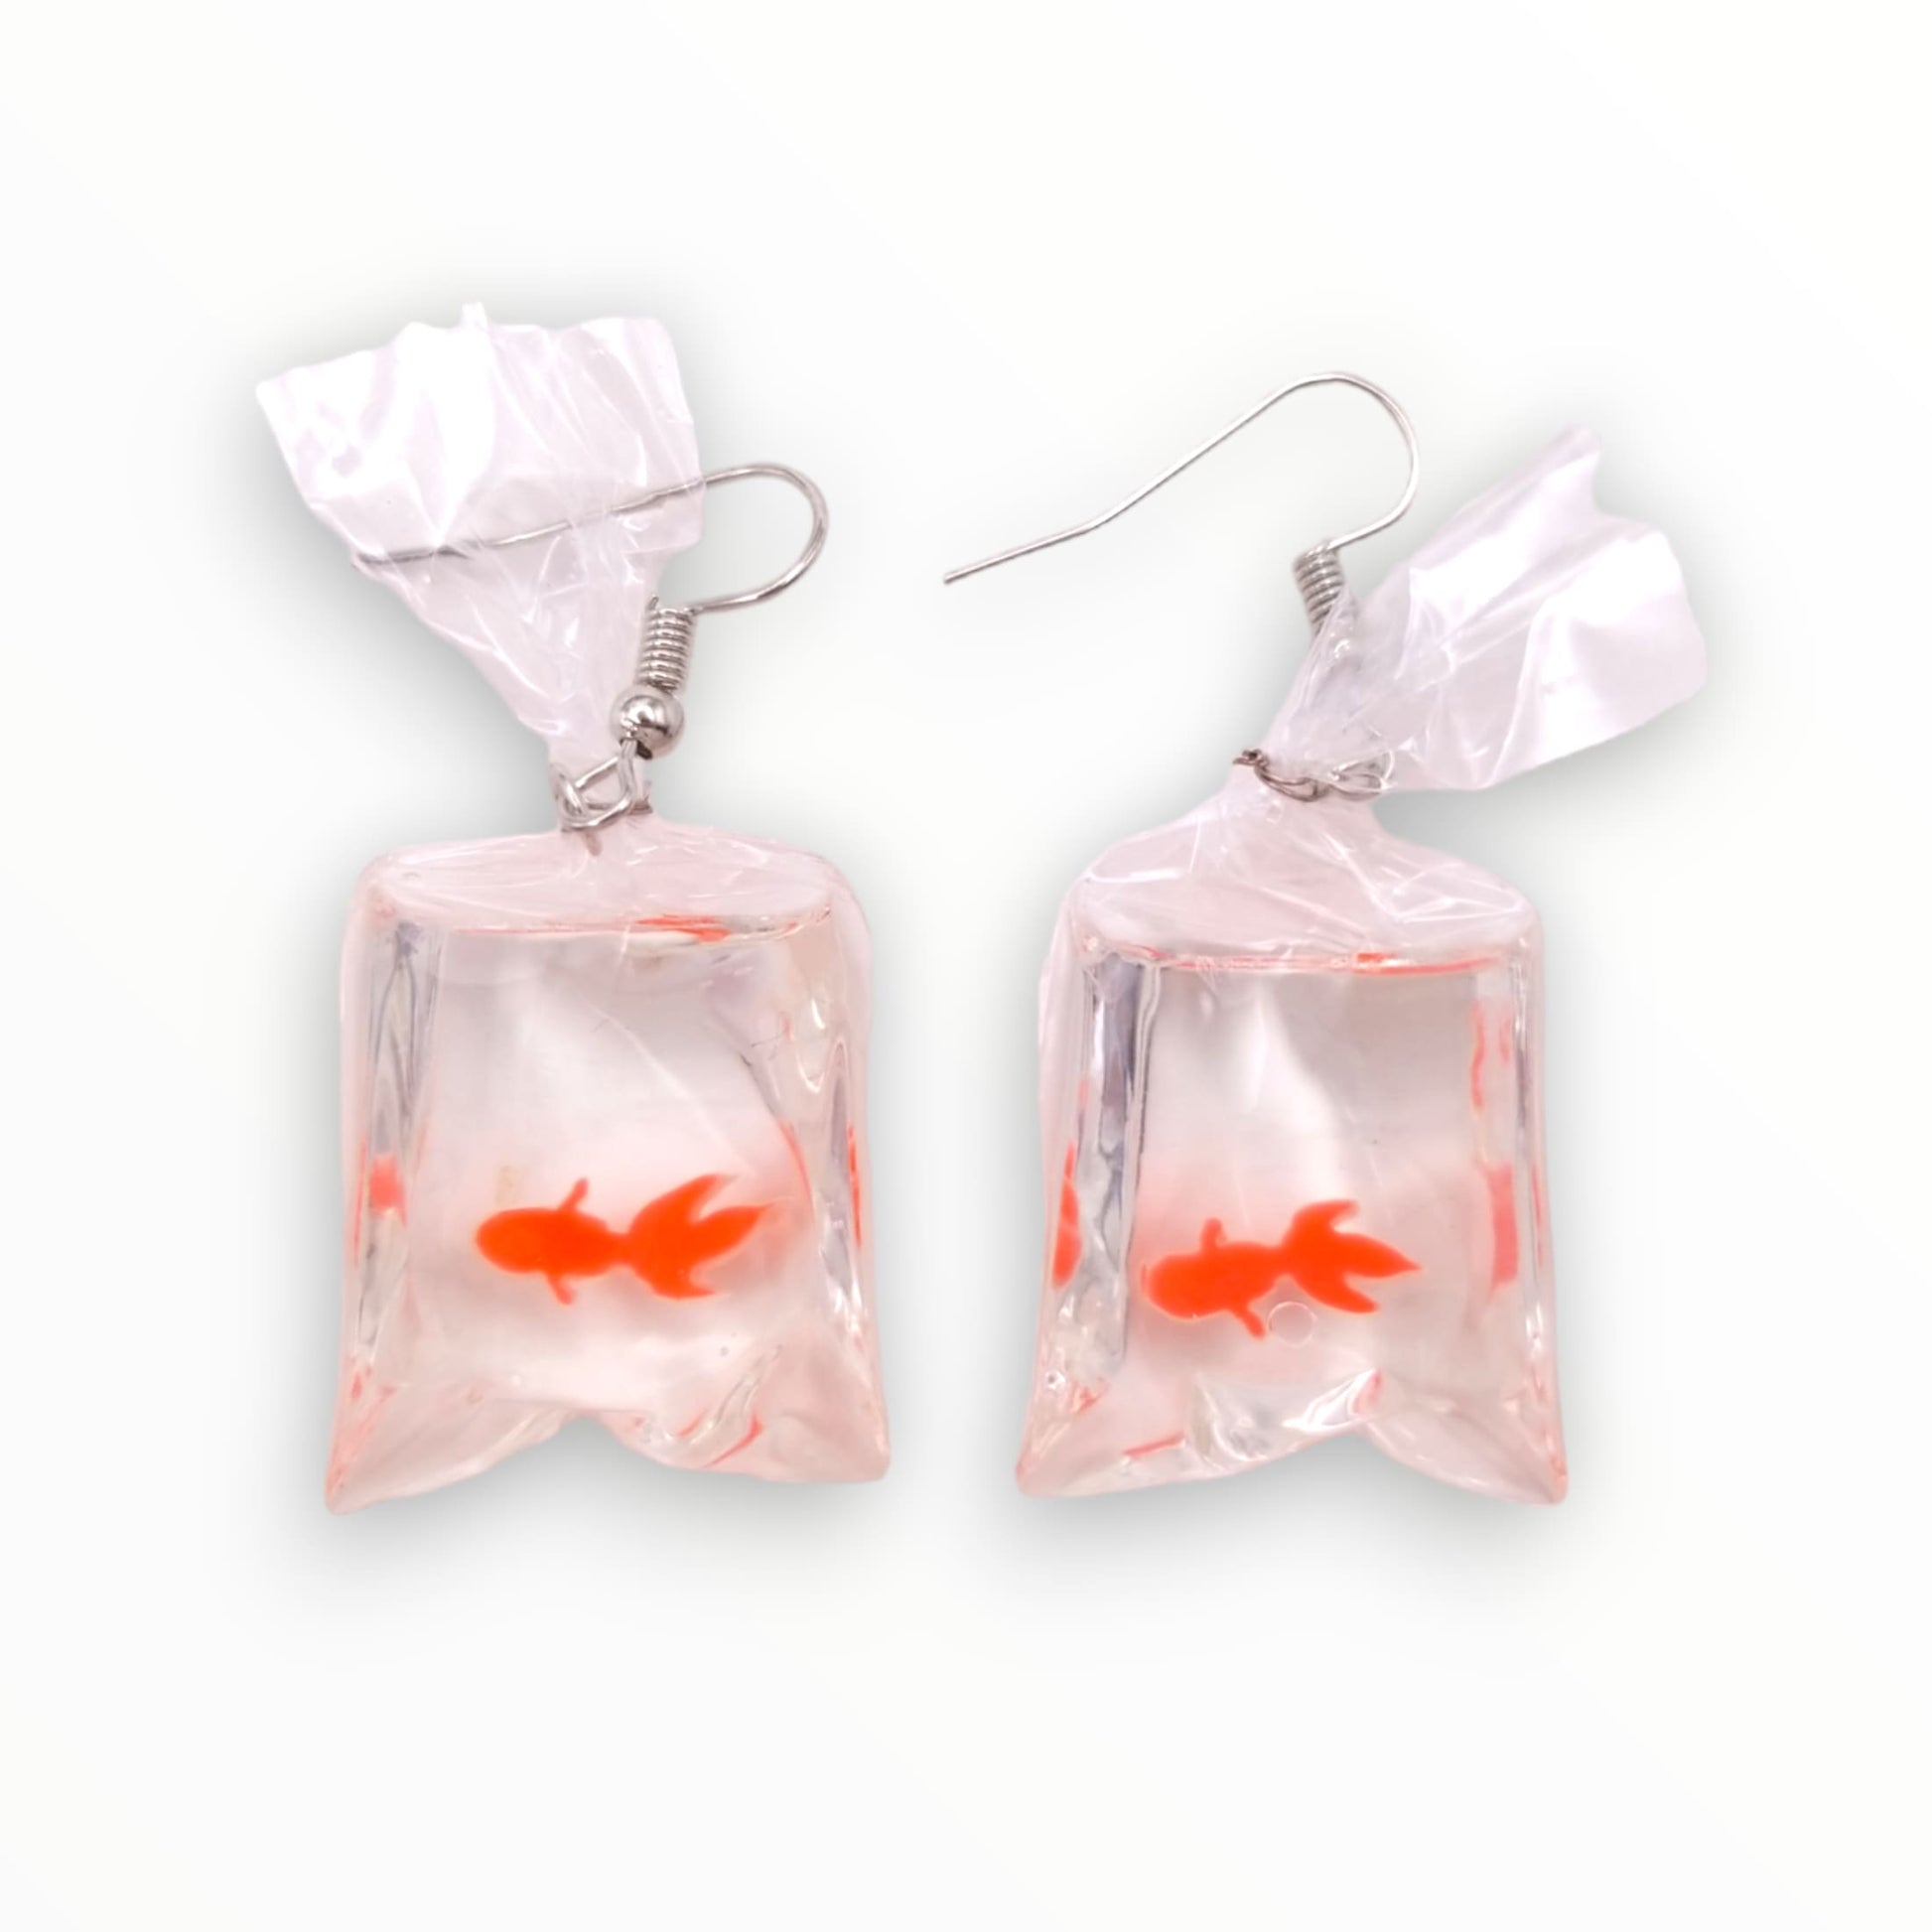 Orange Fish Earrings from Confetti Kitty, Only 7.99